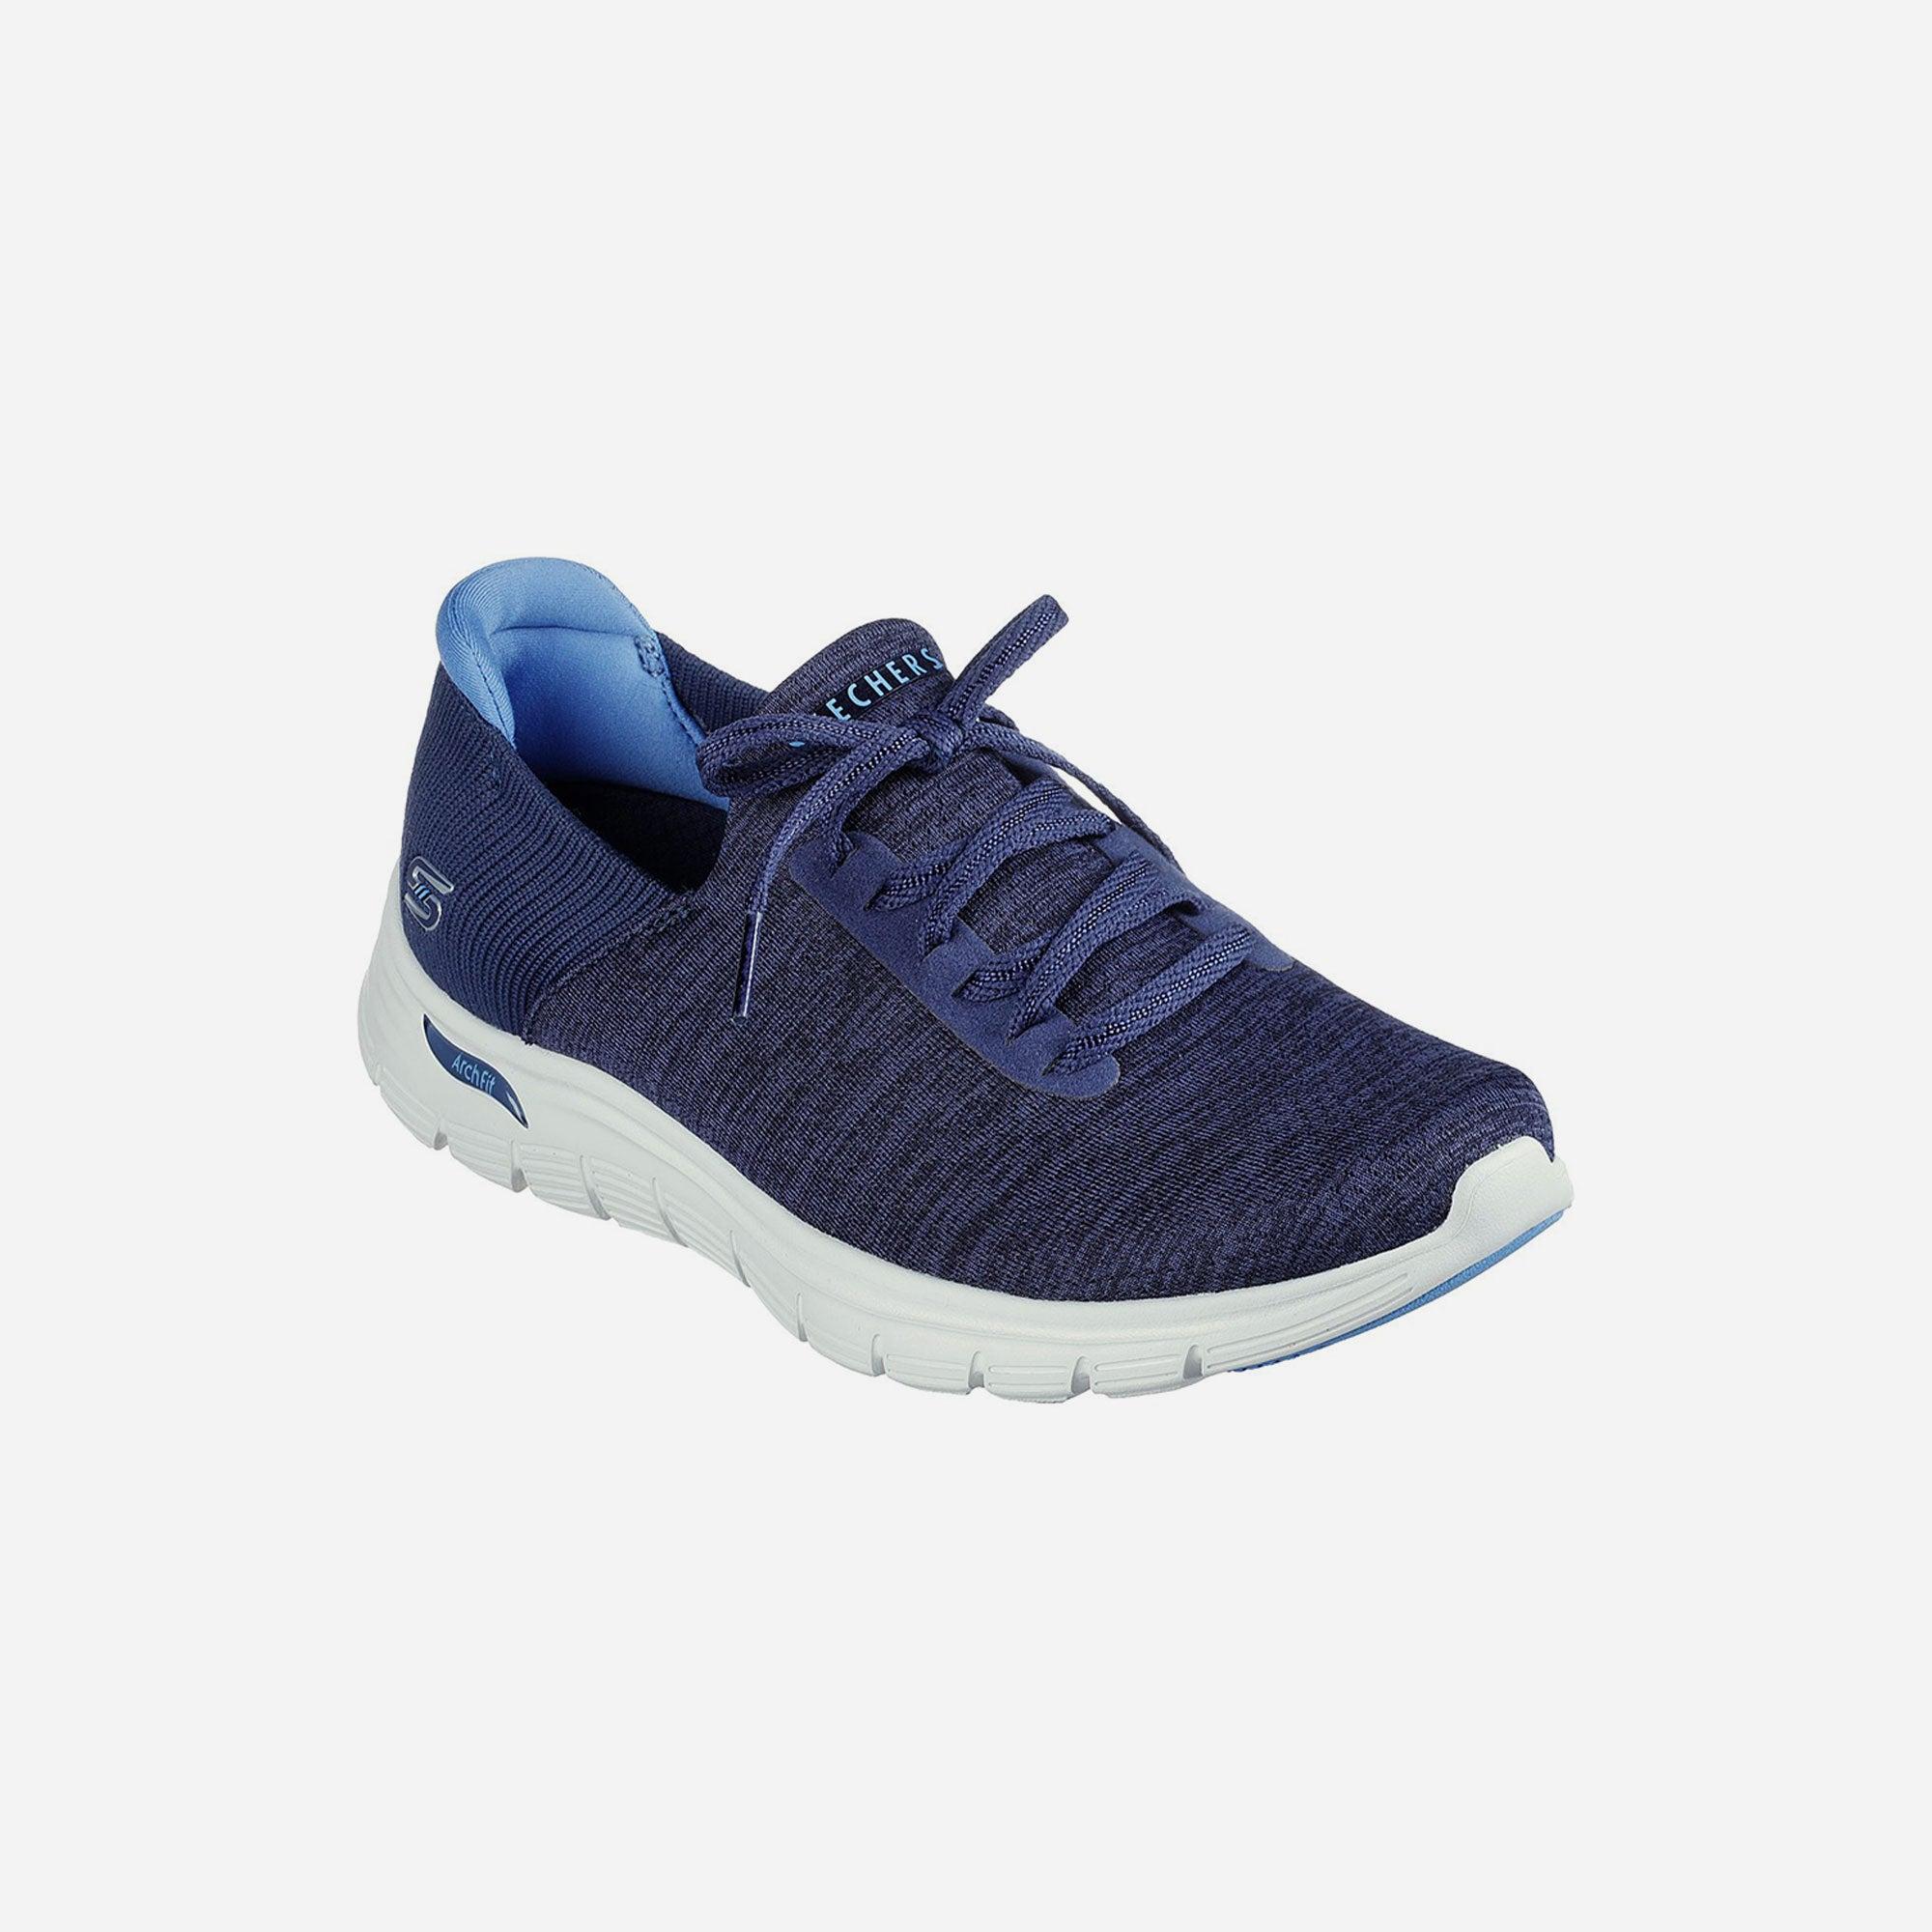 Giày thể thao nữ Skechers Arch Fit Vista - 104373-NVY